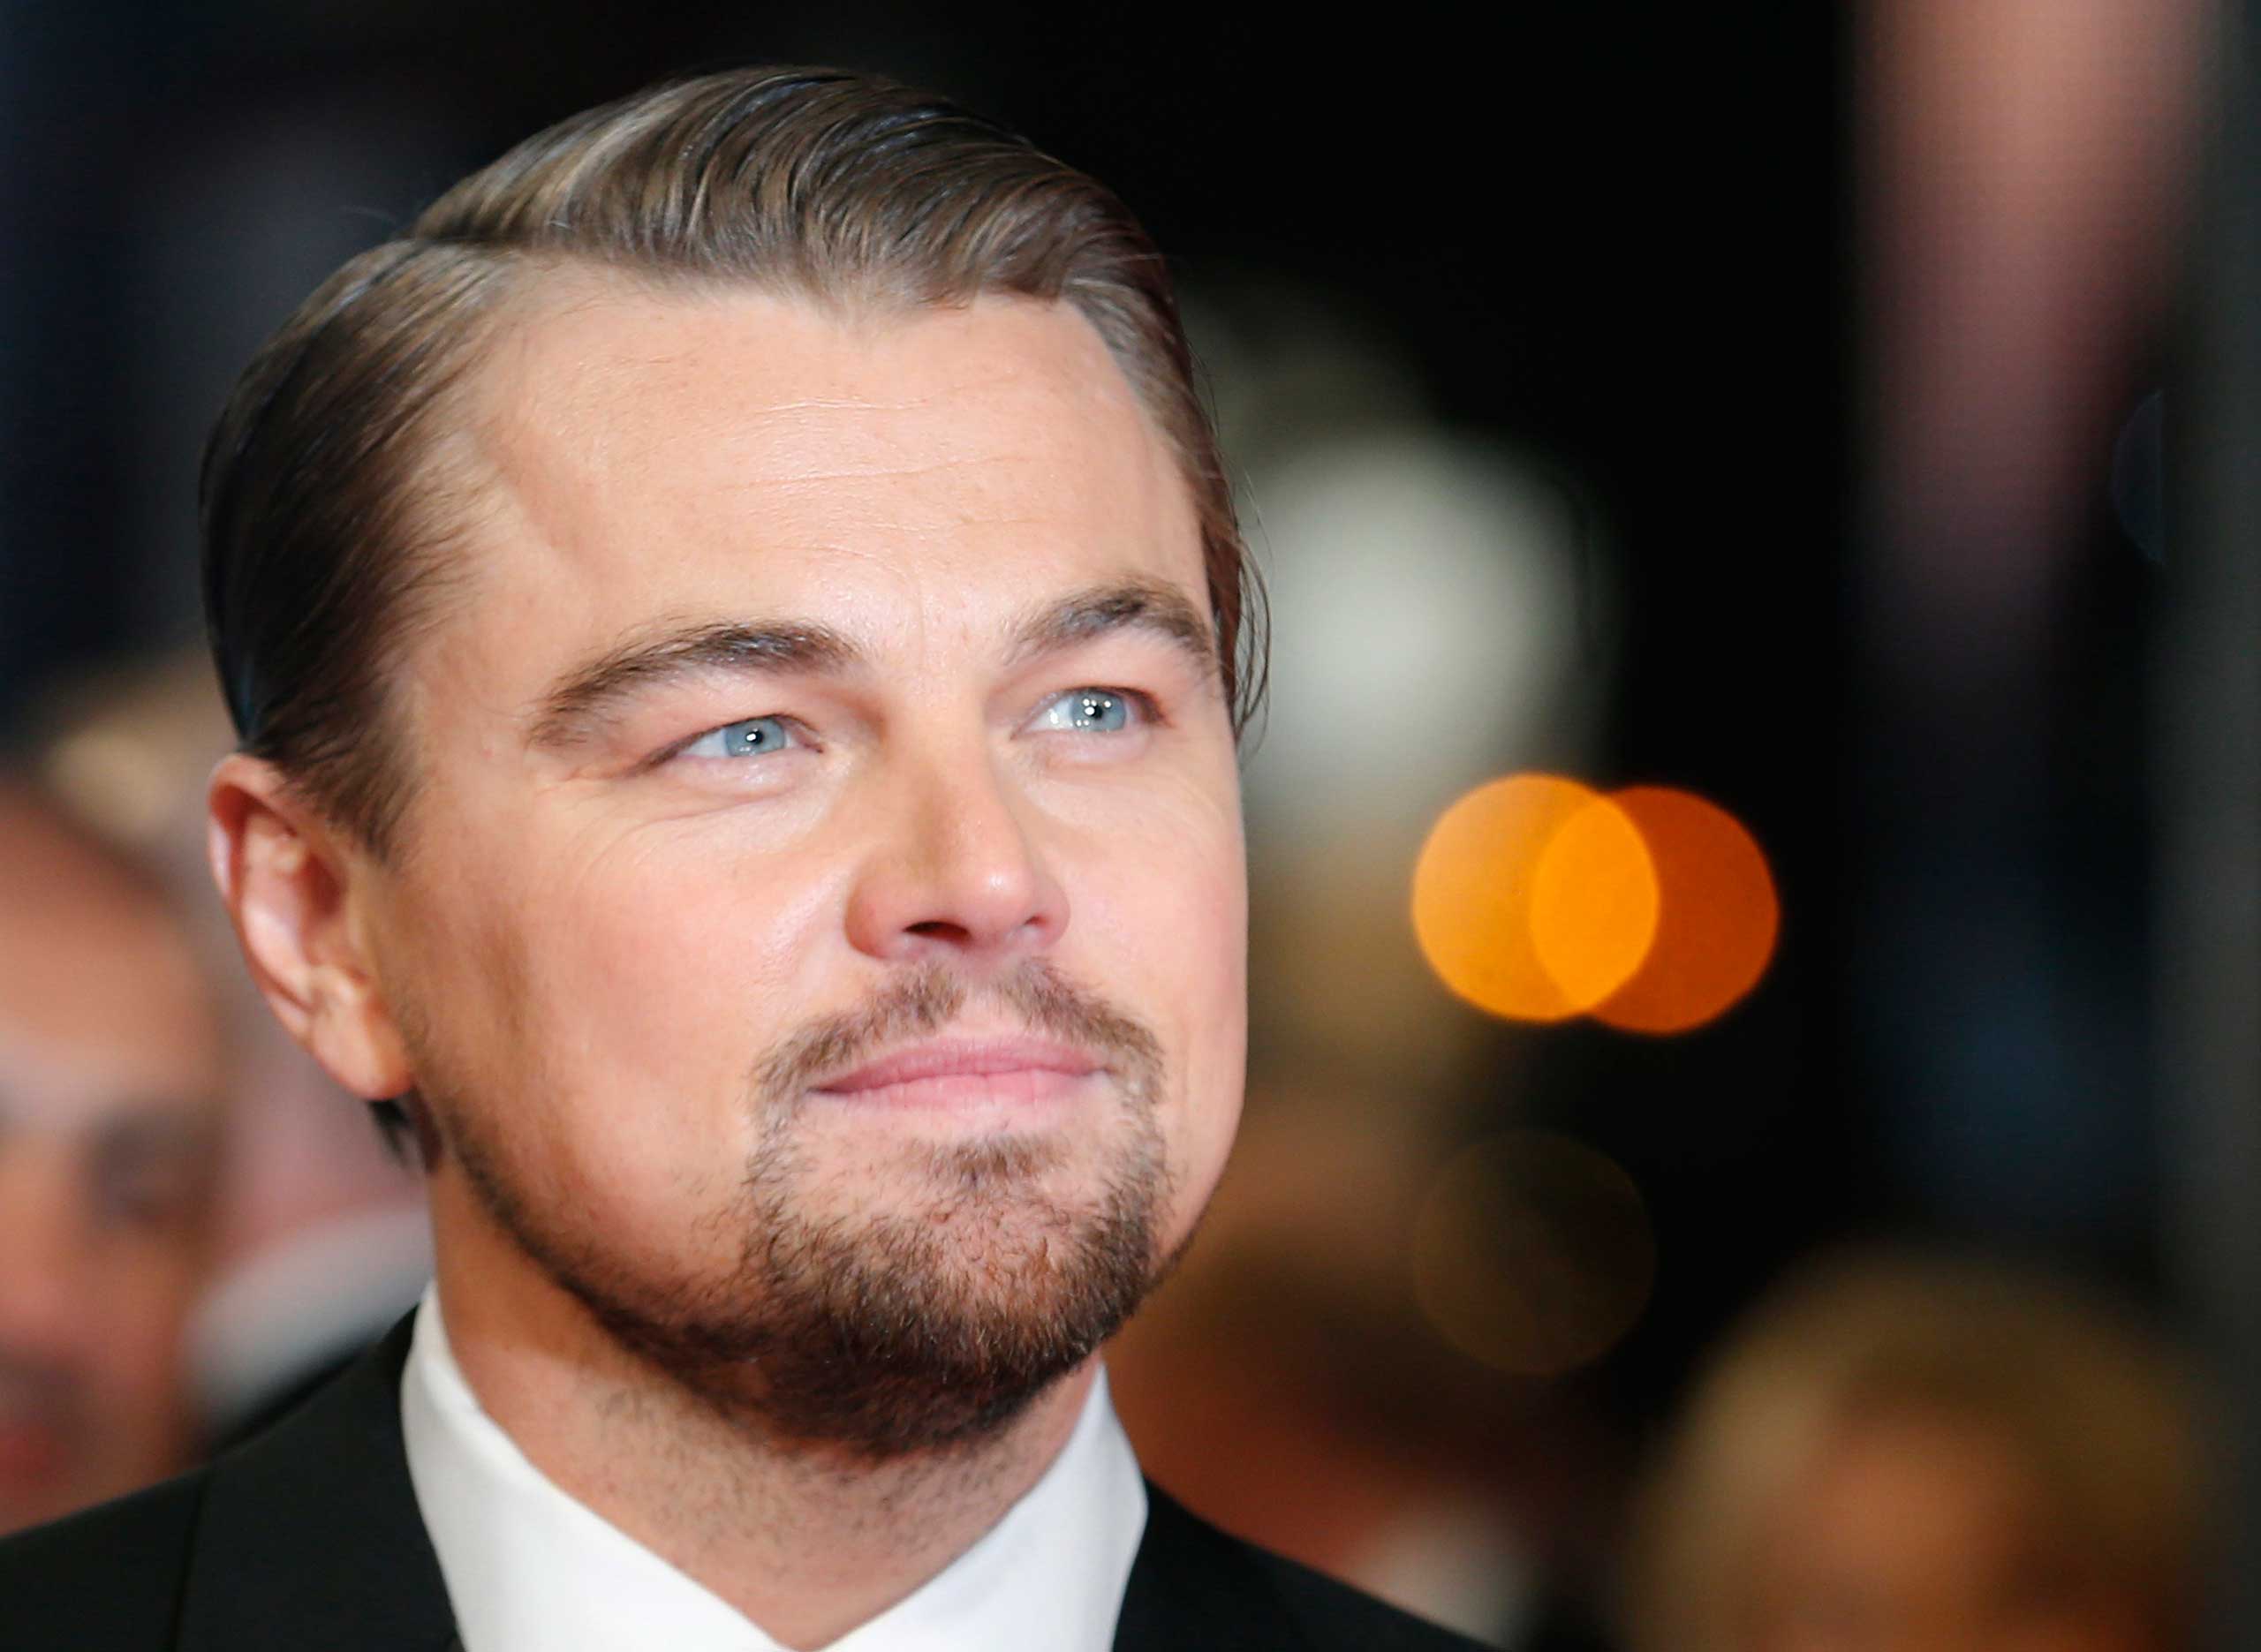 File photo of DiCaprio arriving at the BAFTA awards ceremony at the Royal Opera House in London